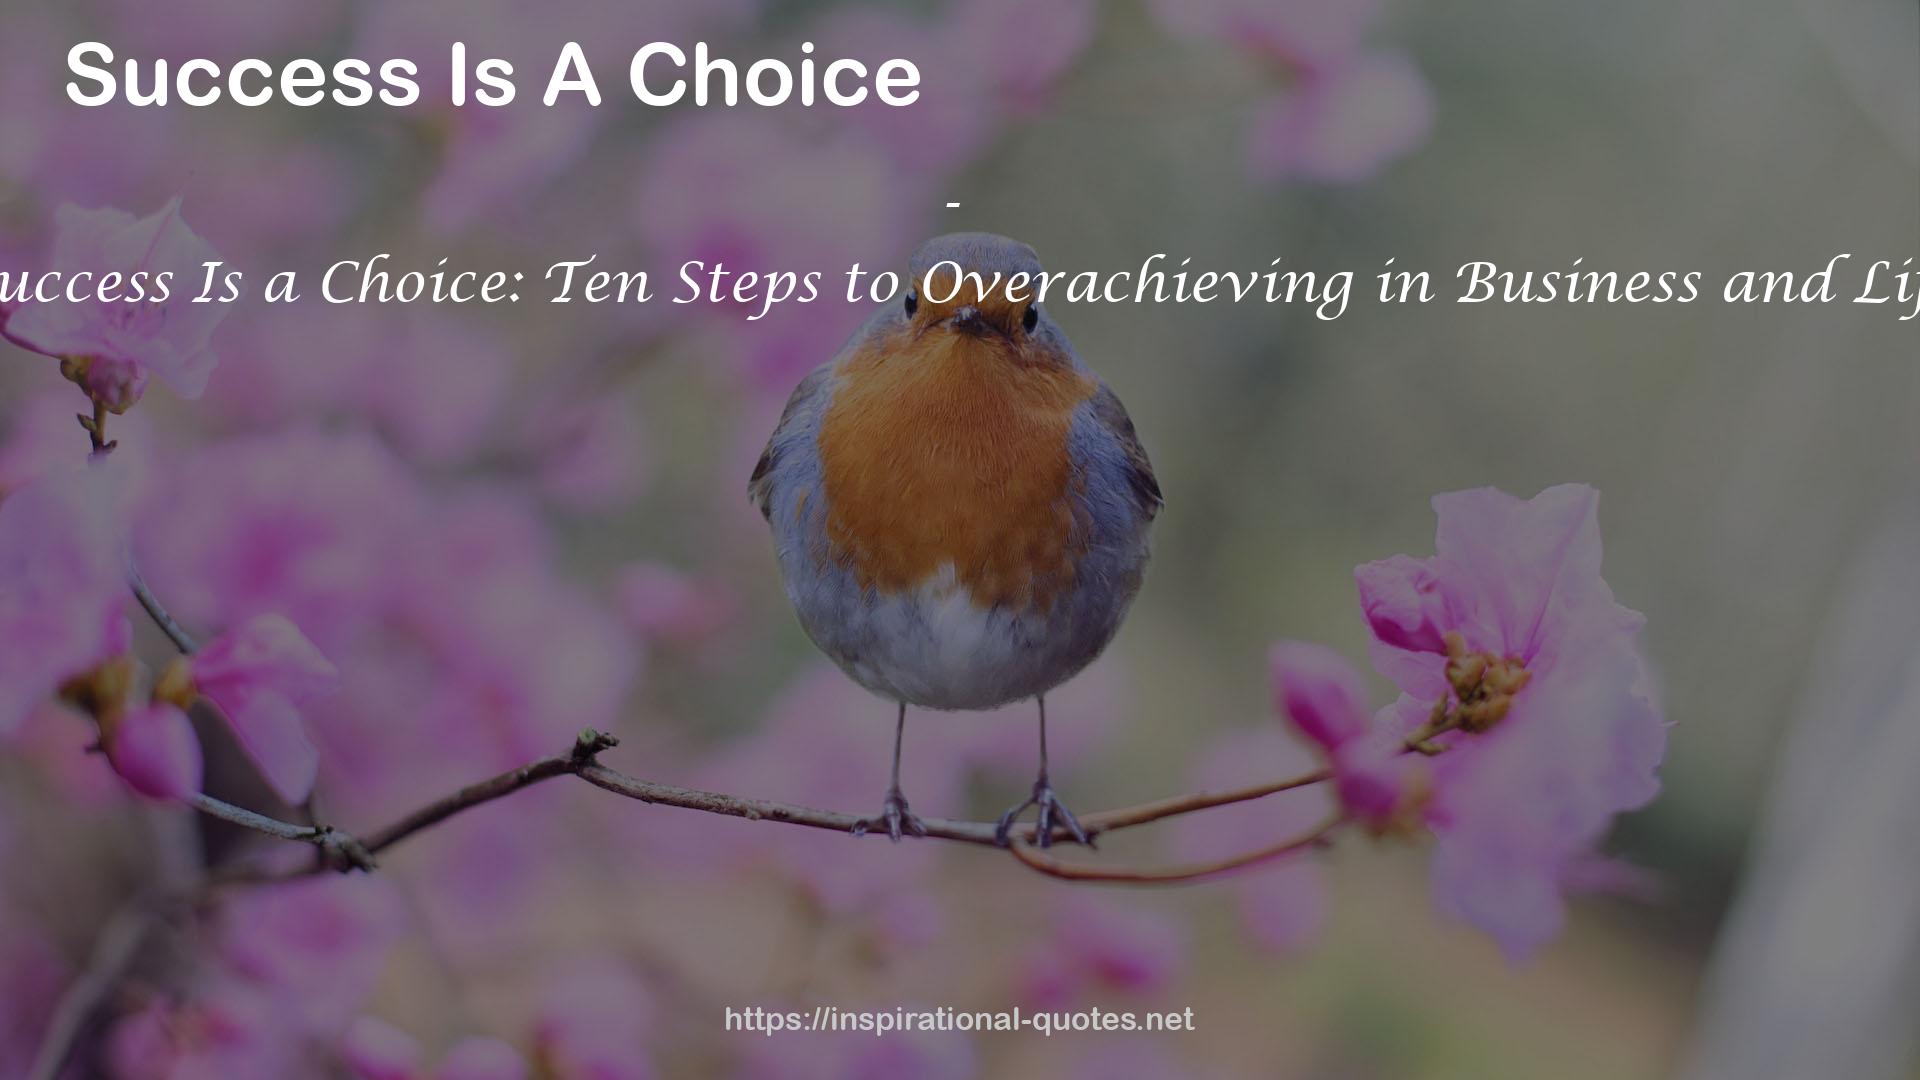 Success Is a Choice: Ten Steps to Overachieving in Business and Life QUOTES